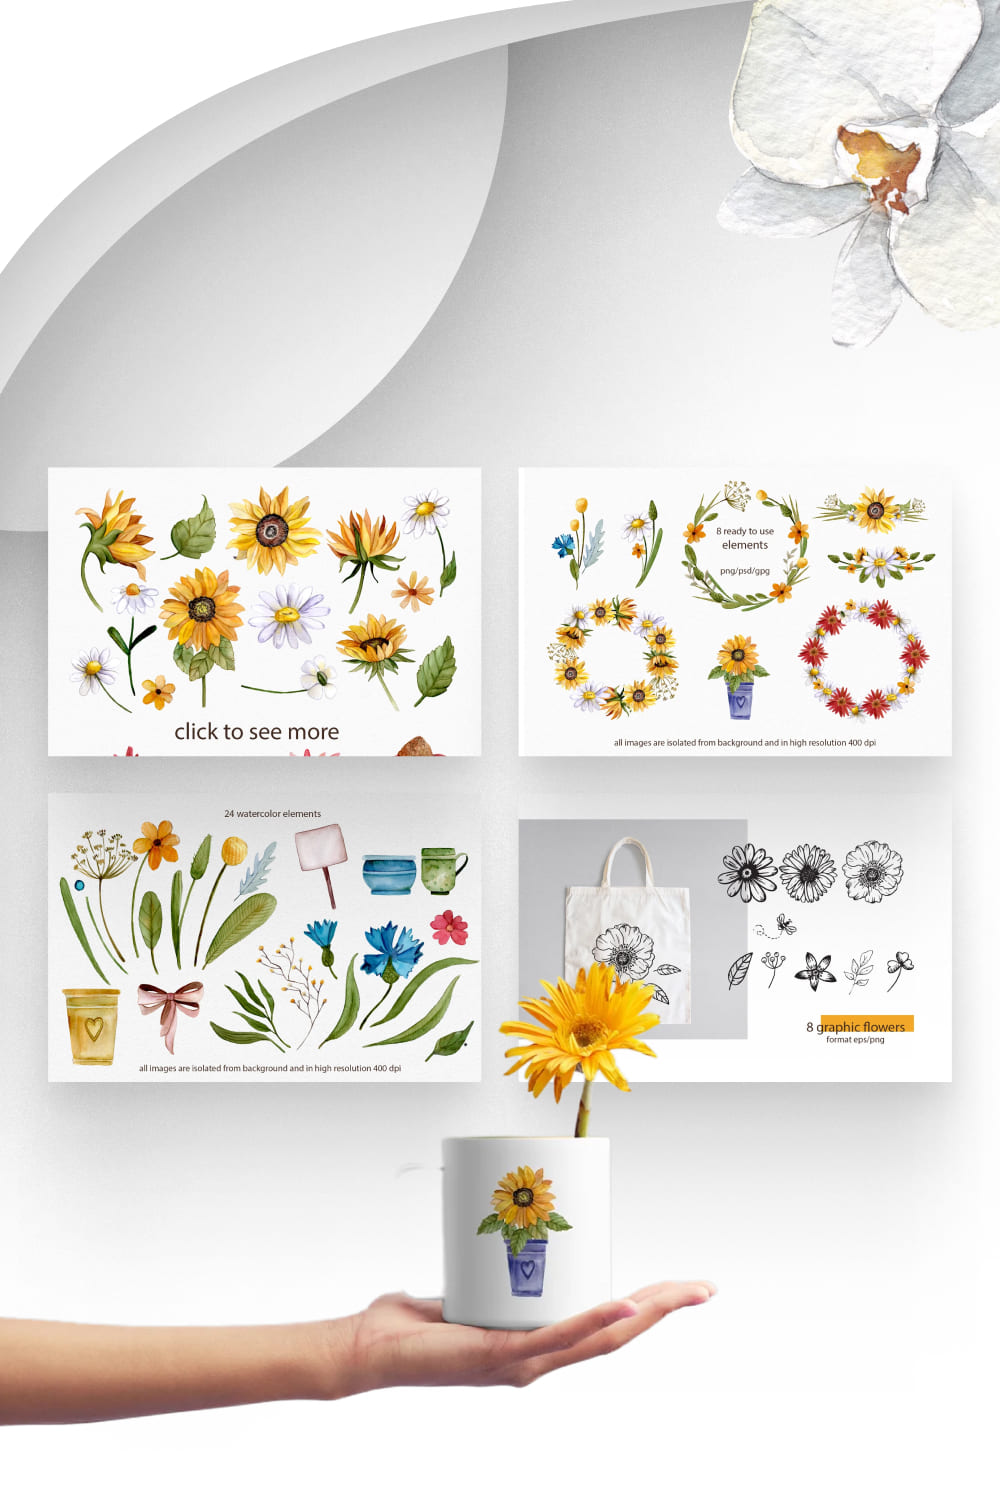 Watercolor Sunflowers and Daisies.